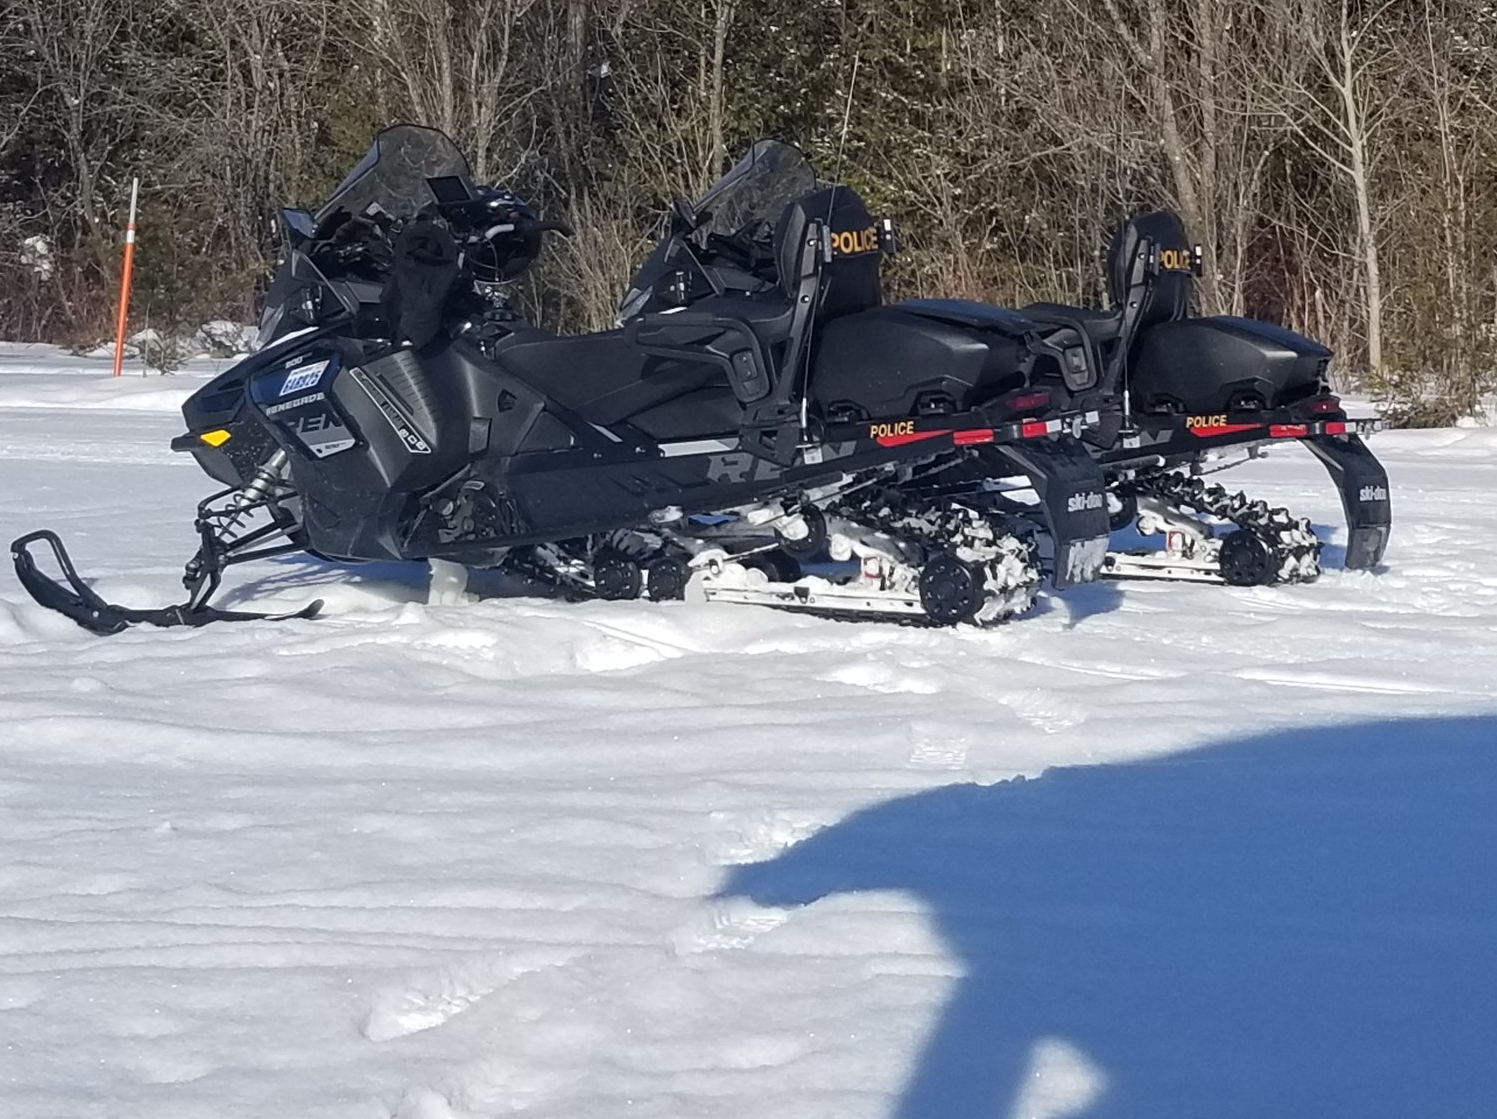 Snowmobiler arrested for impaired driving